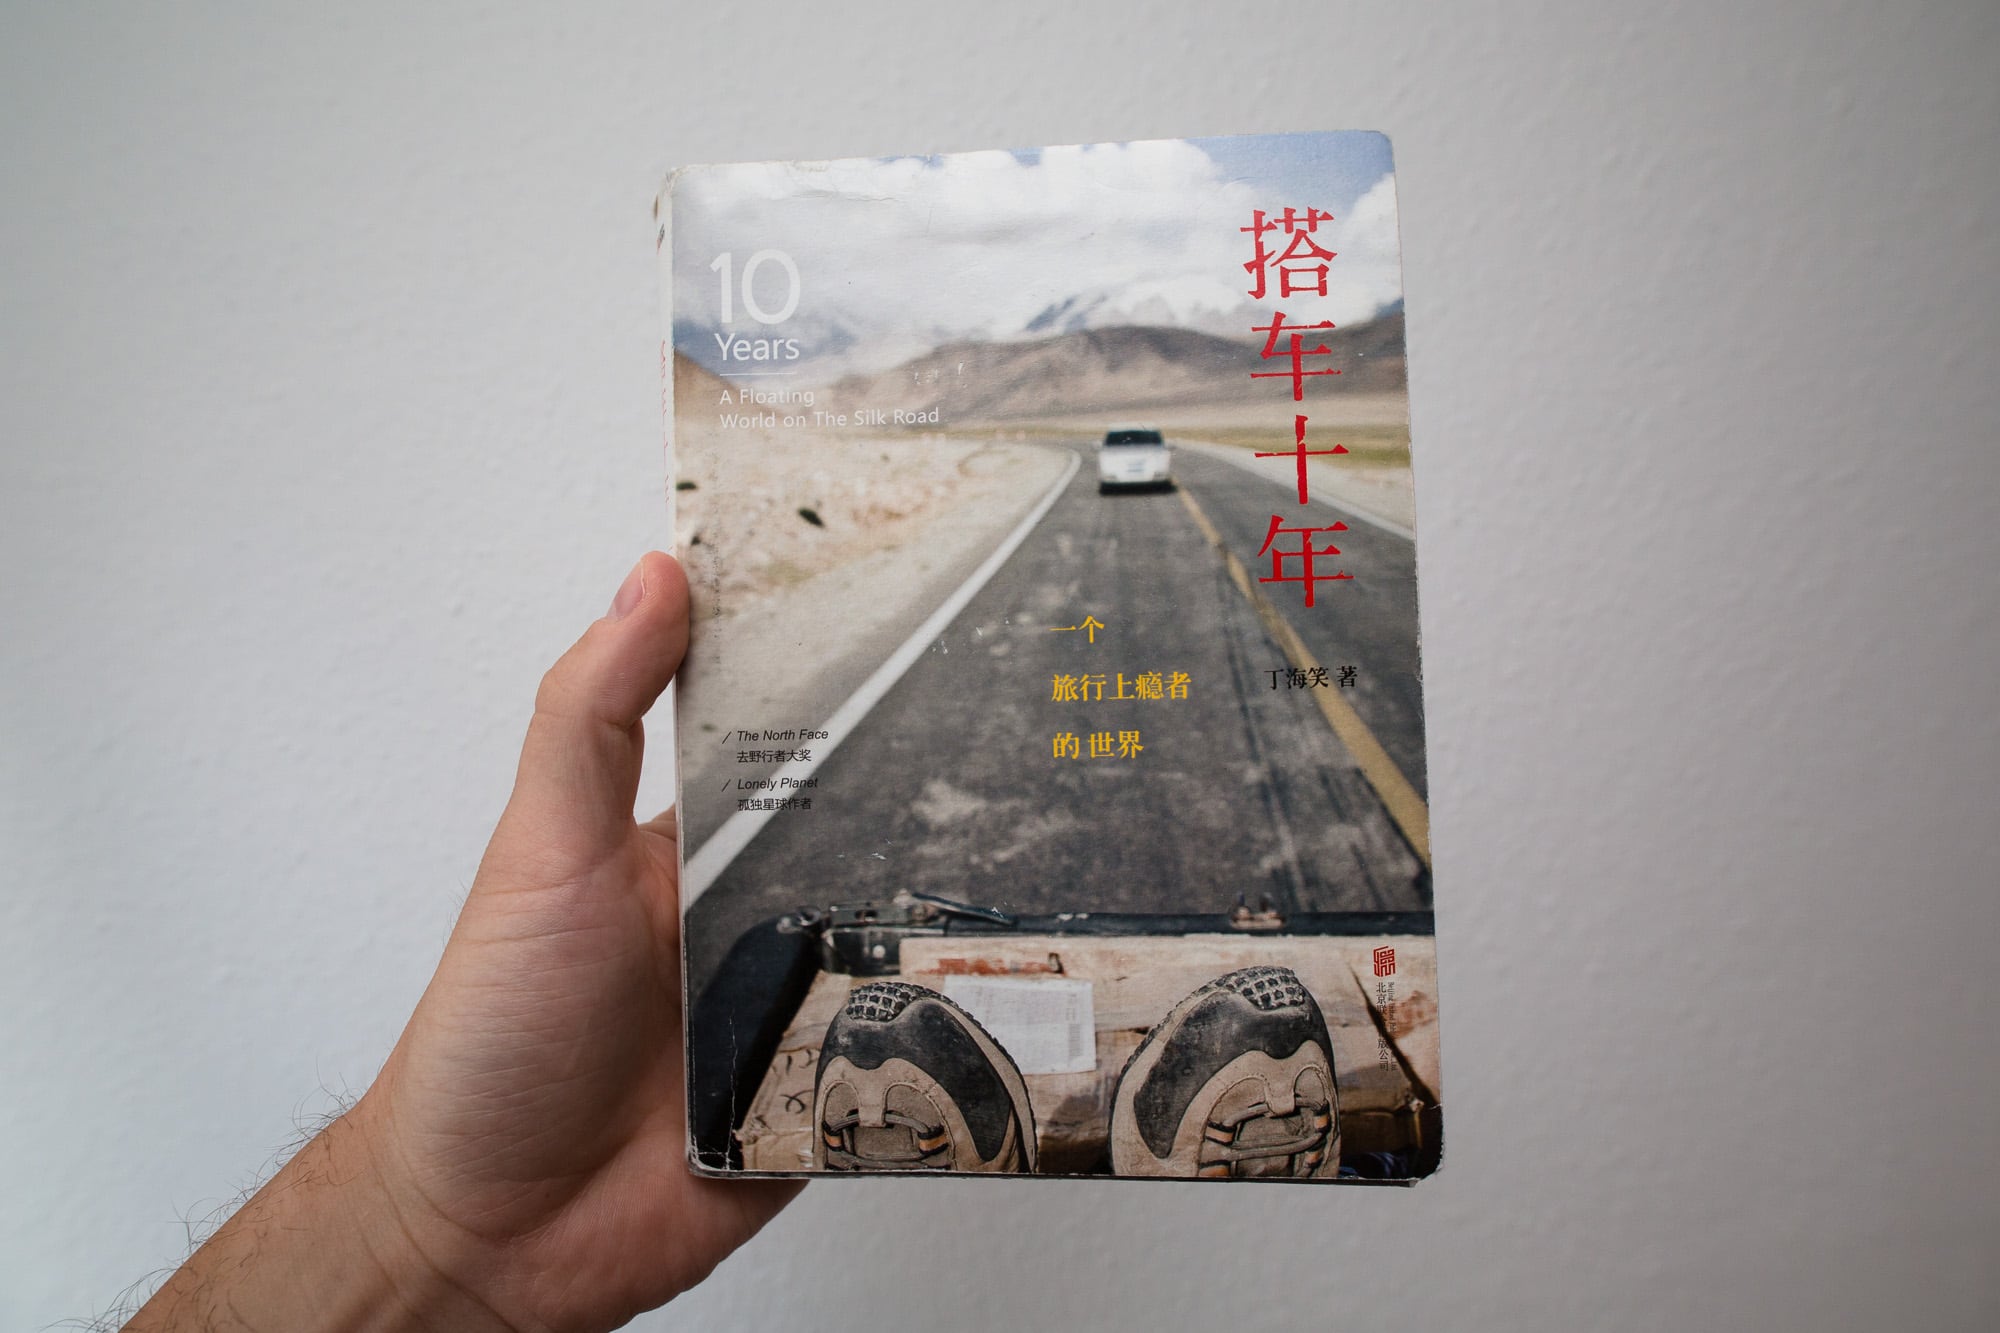 Ding Haixiao - "Ten Years Of Hitchhiking"